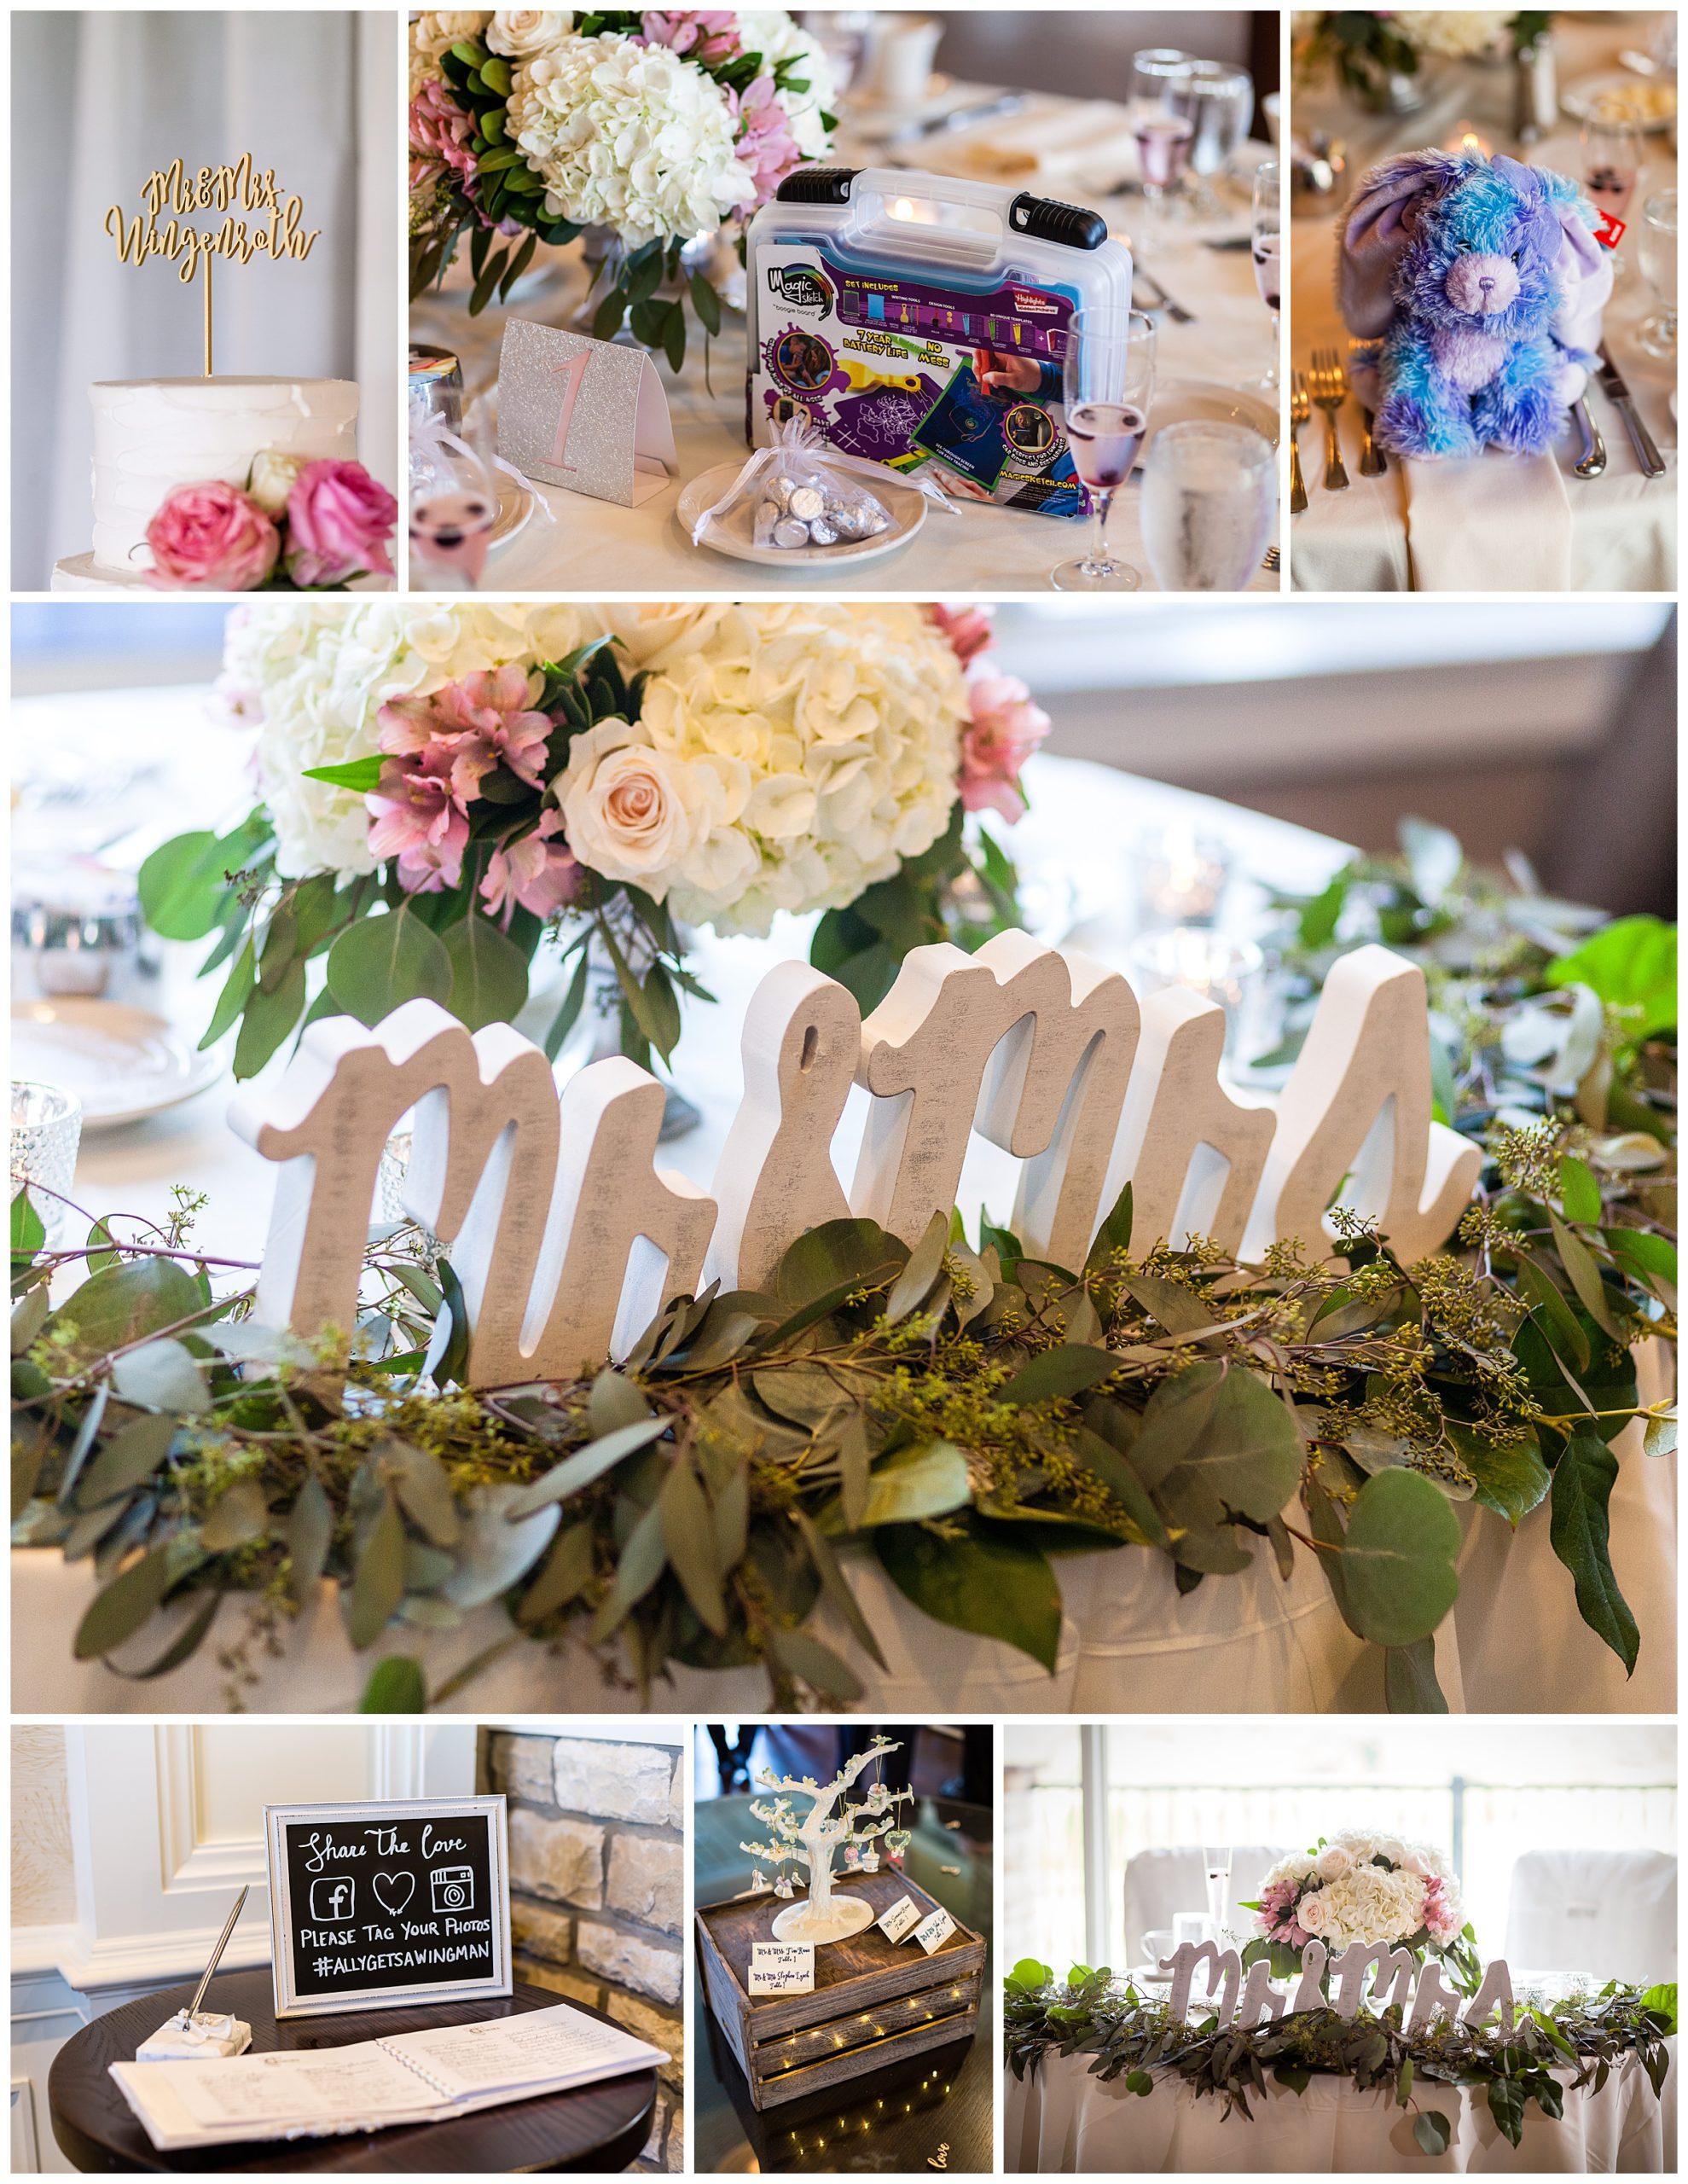 Scotland Run wedding reception details with wedding cake, guest book, sweetheart table, and mr. and mrs. signs